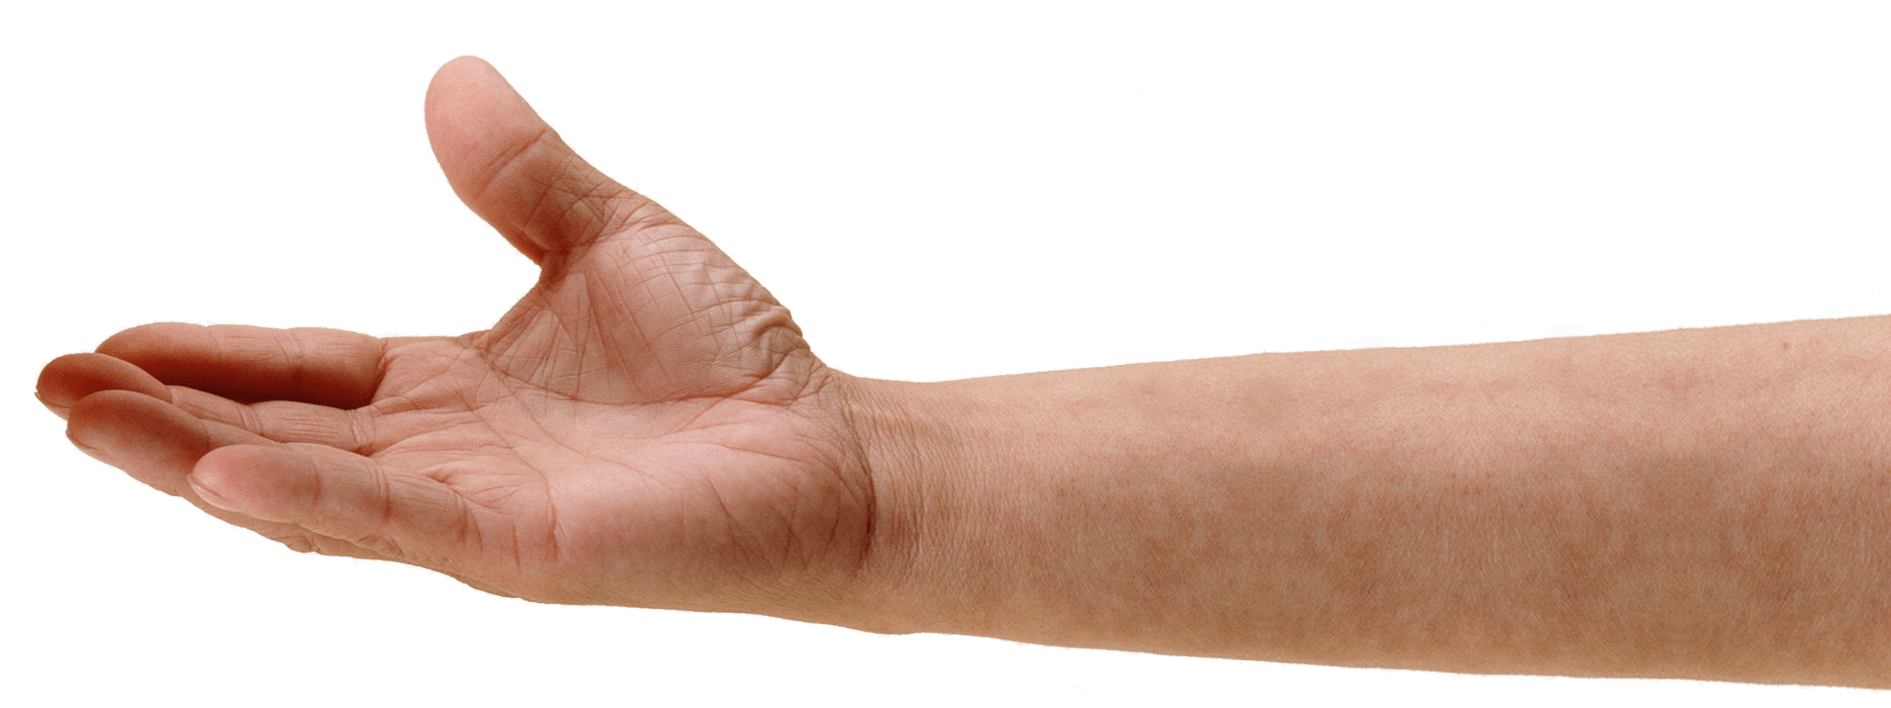 Hand PNG Images HD - PNG All